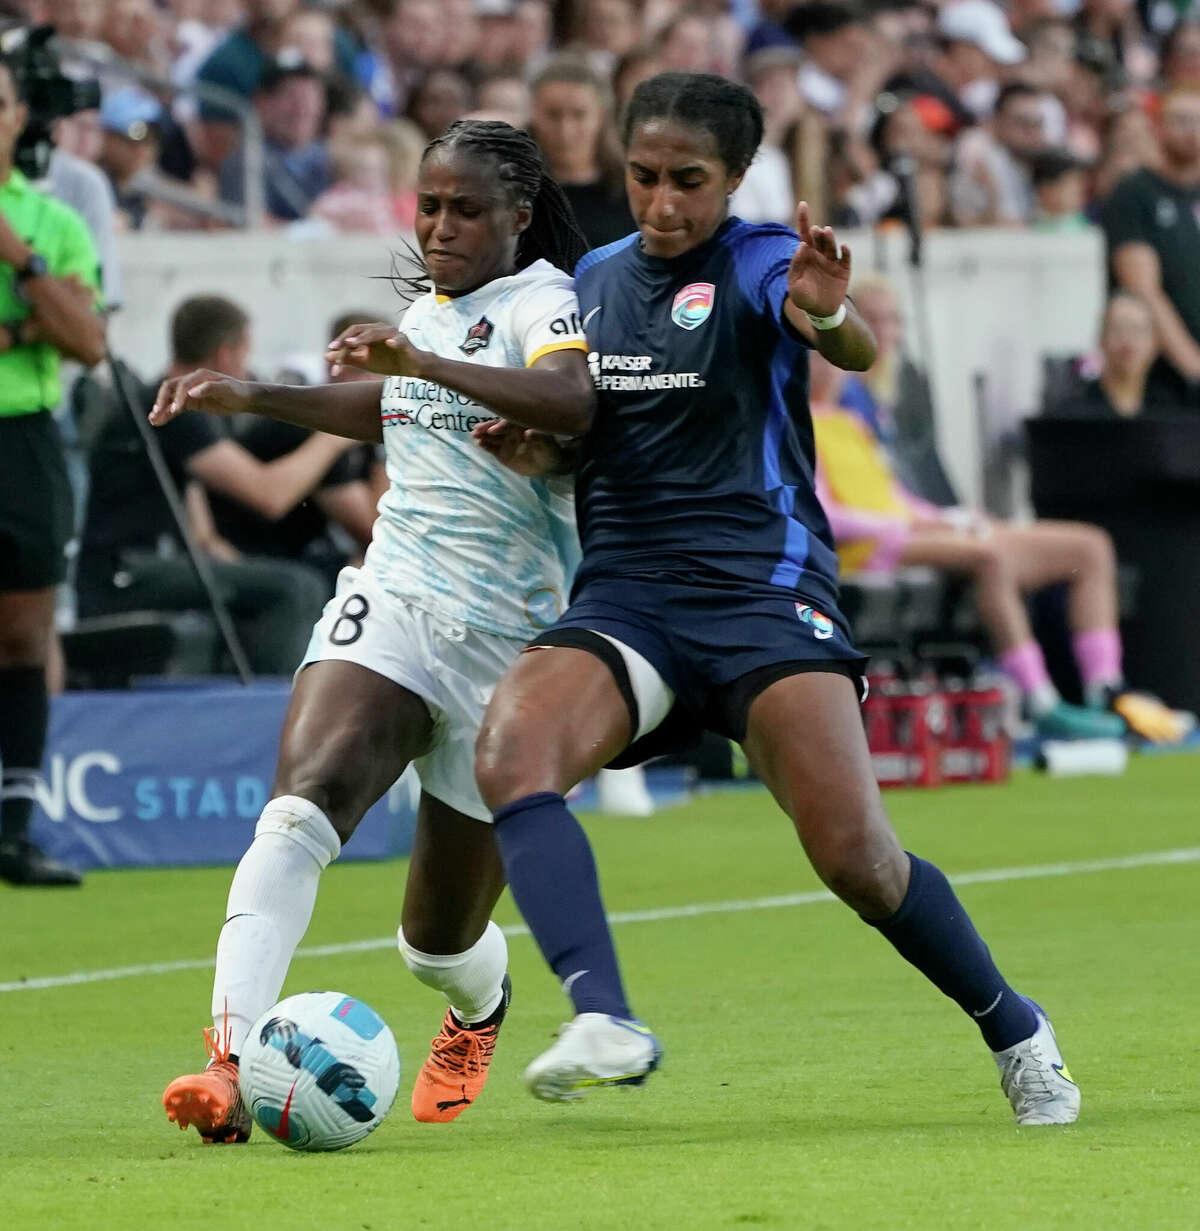 Houston Dash unbeaten run ends in San Diego with 3-1 loss to Wave